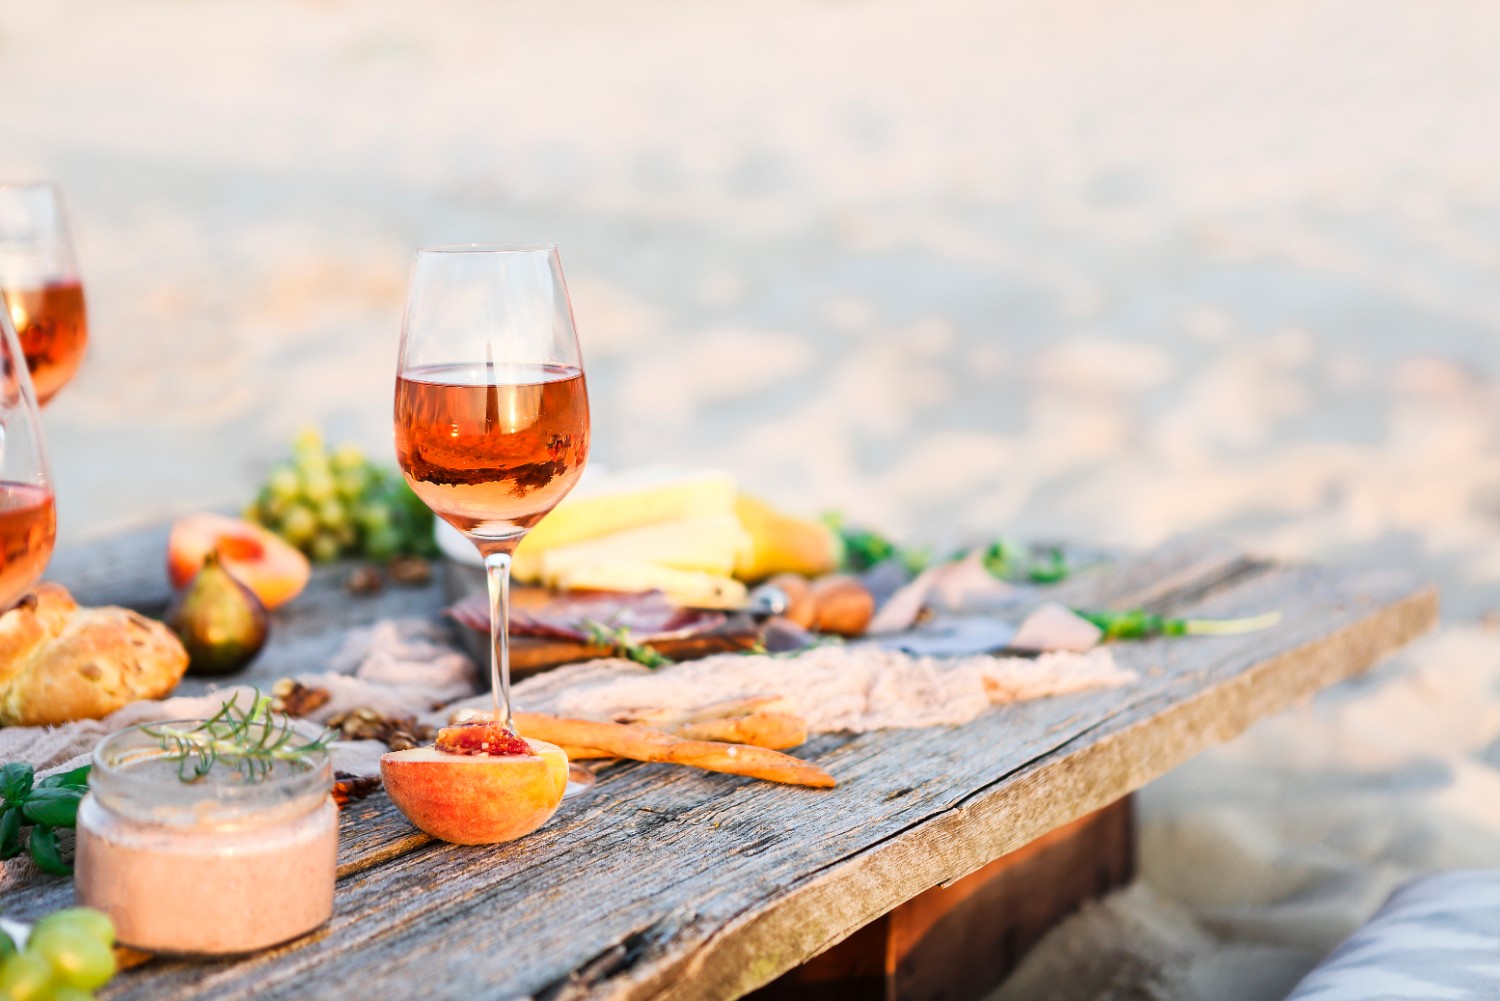 Glass of rose wine on rustic table. Food and drink background